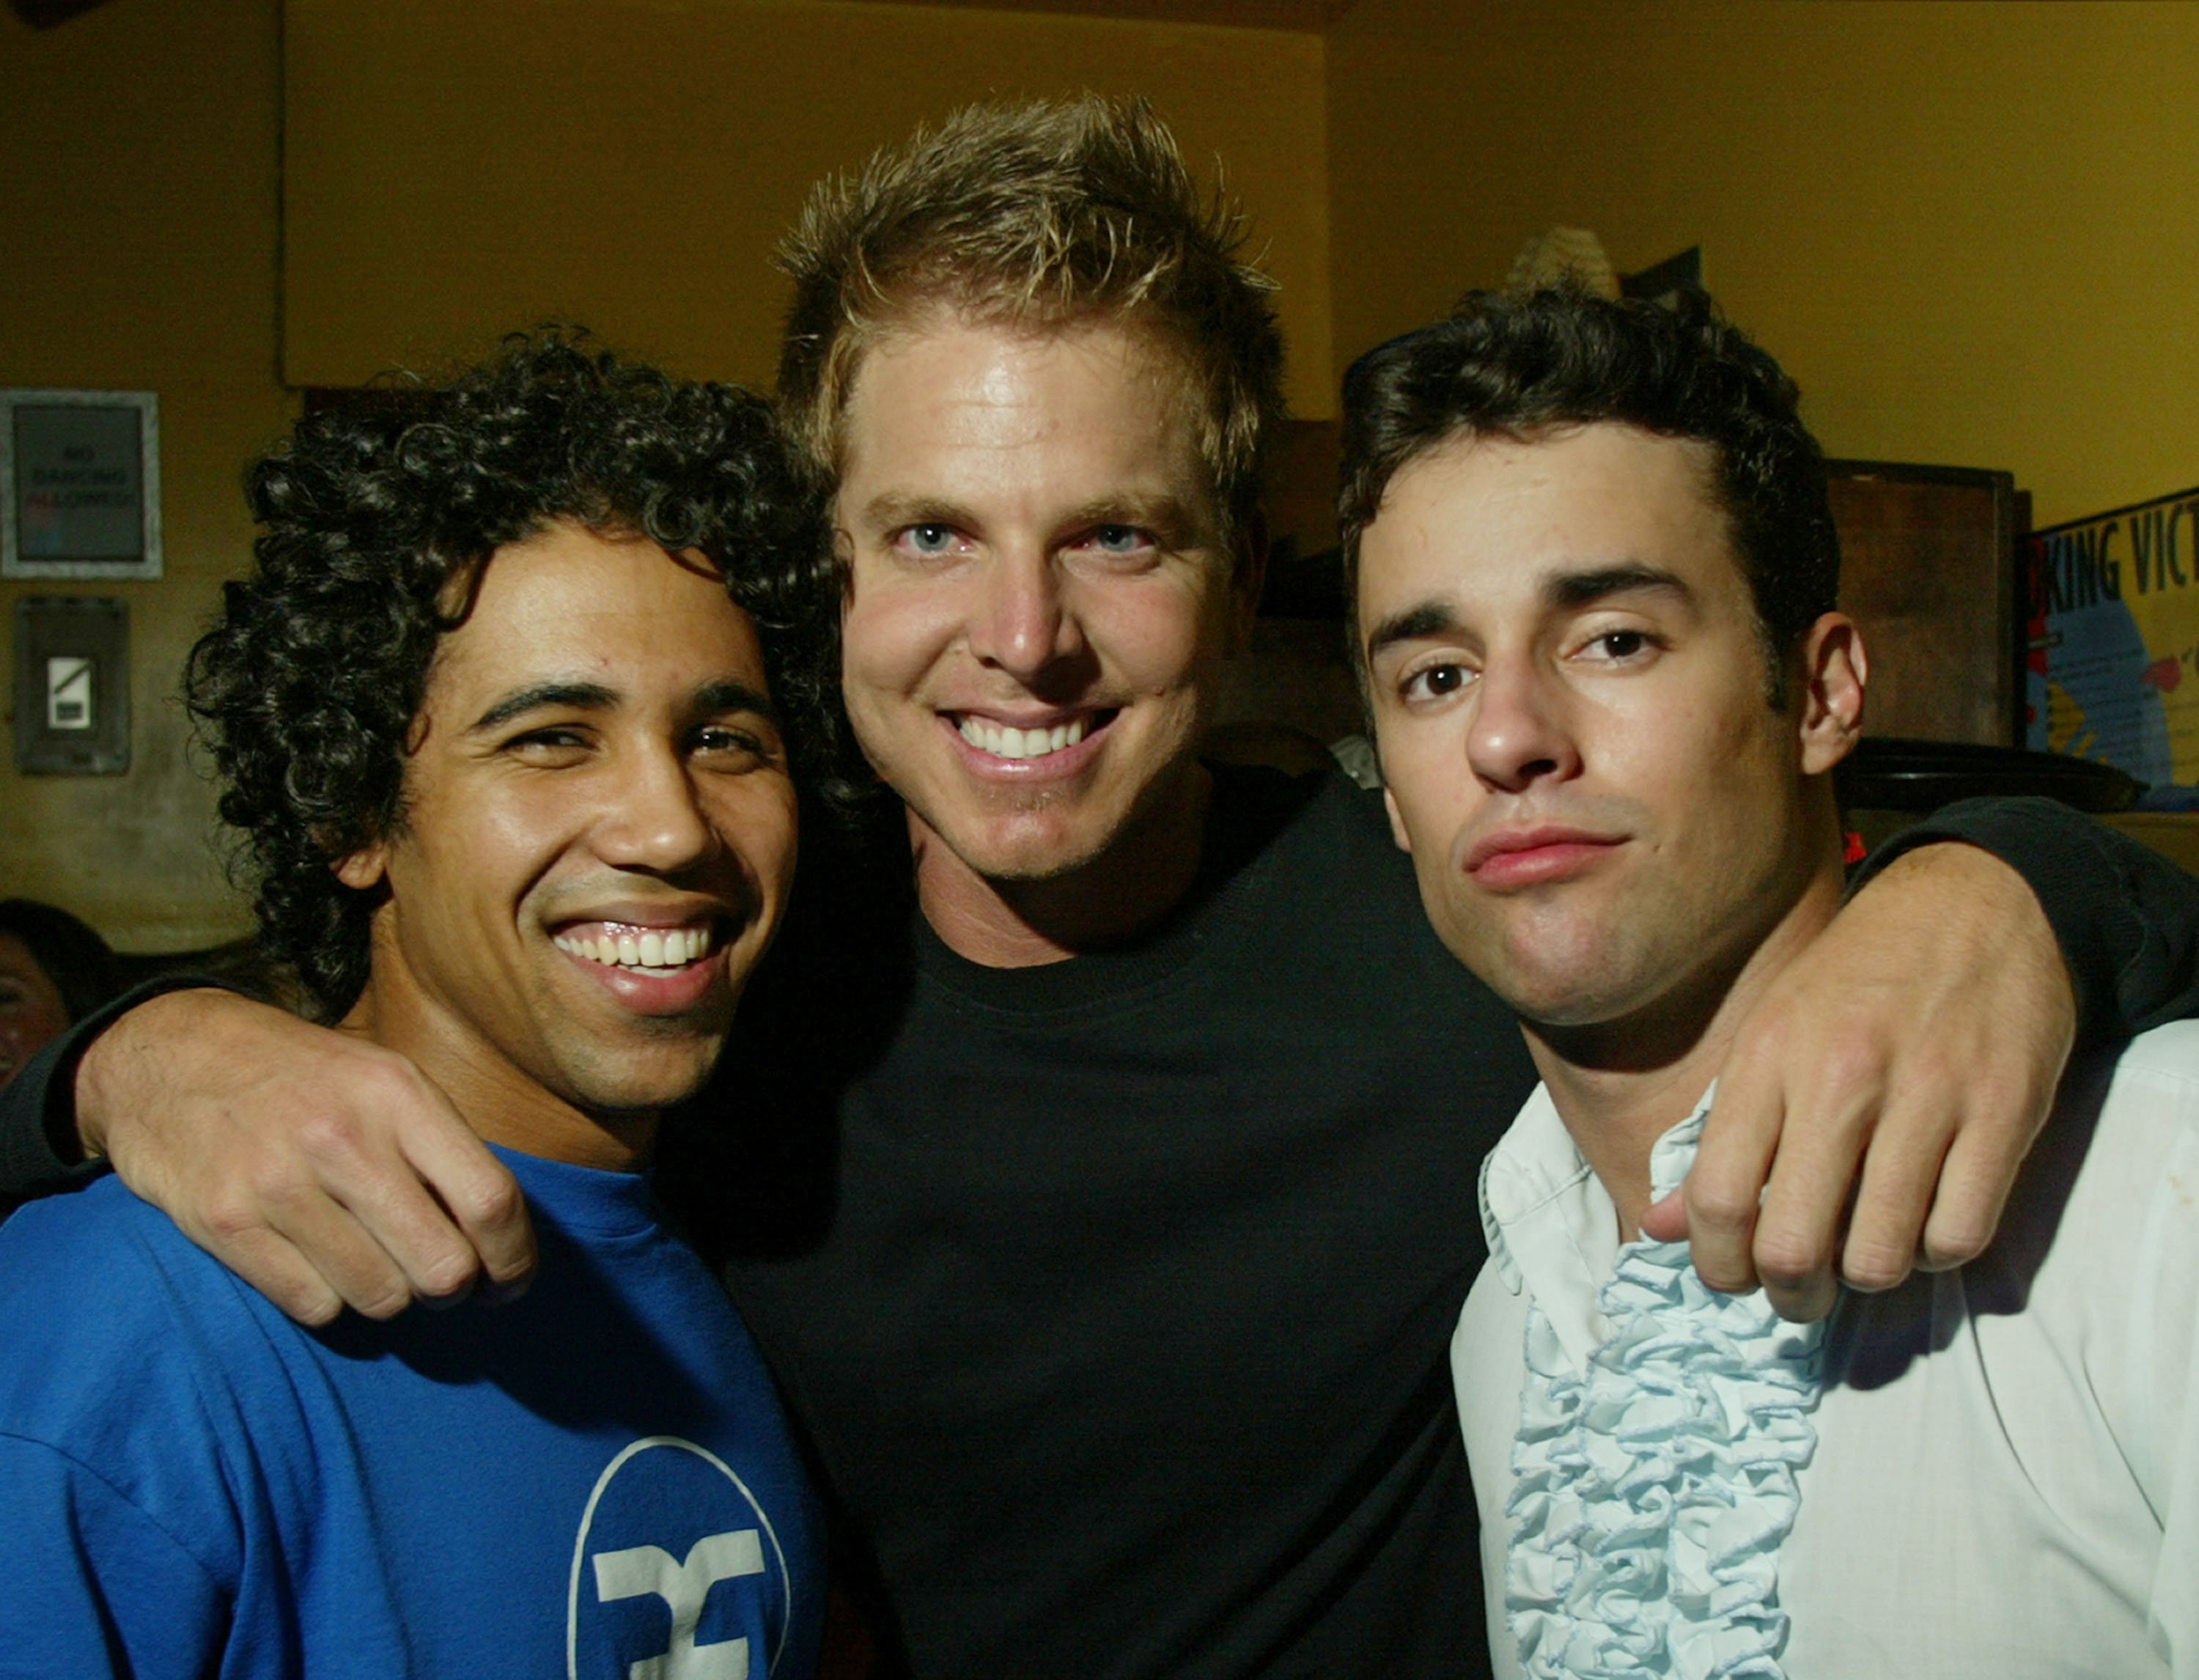 MTV Real World stars Adam King (L-R), Mark Long, and Ace Amerson attend the Real World party